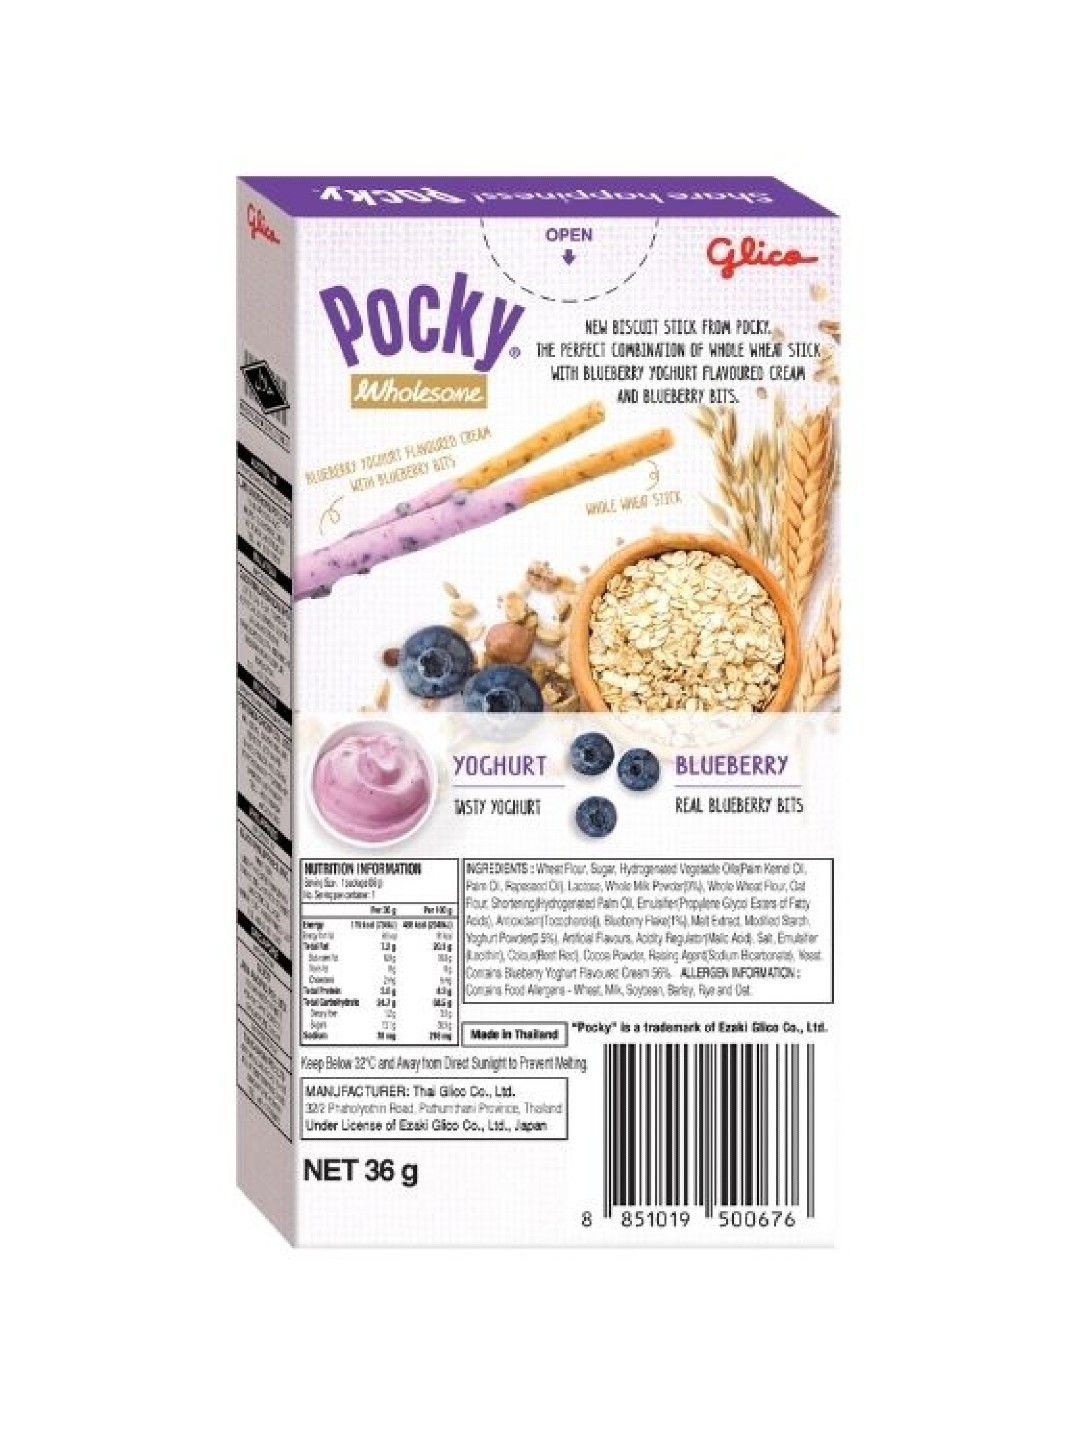 Pocky Wholesome Blueberry Yoghurt Biscuit Sticks (Bundle of 3) (No Color- Image 2)